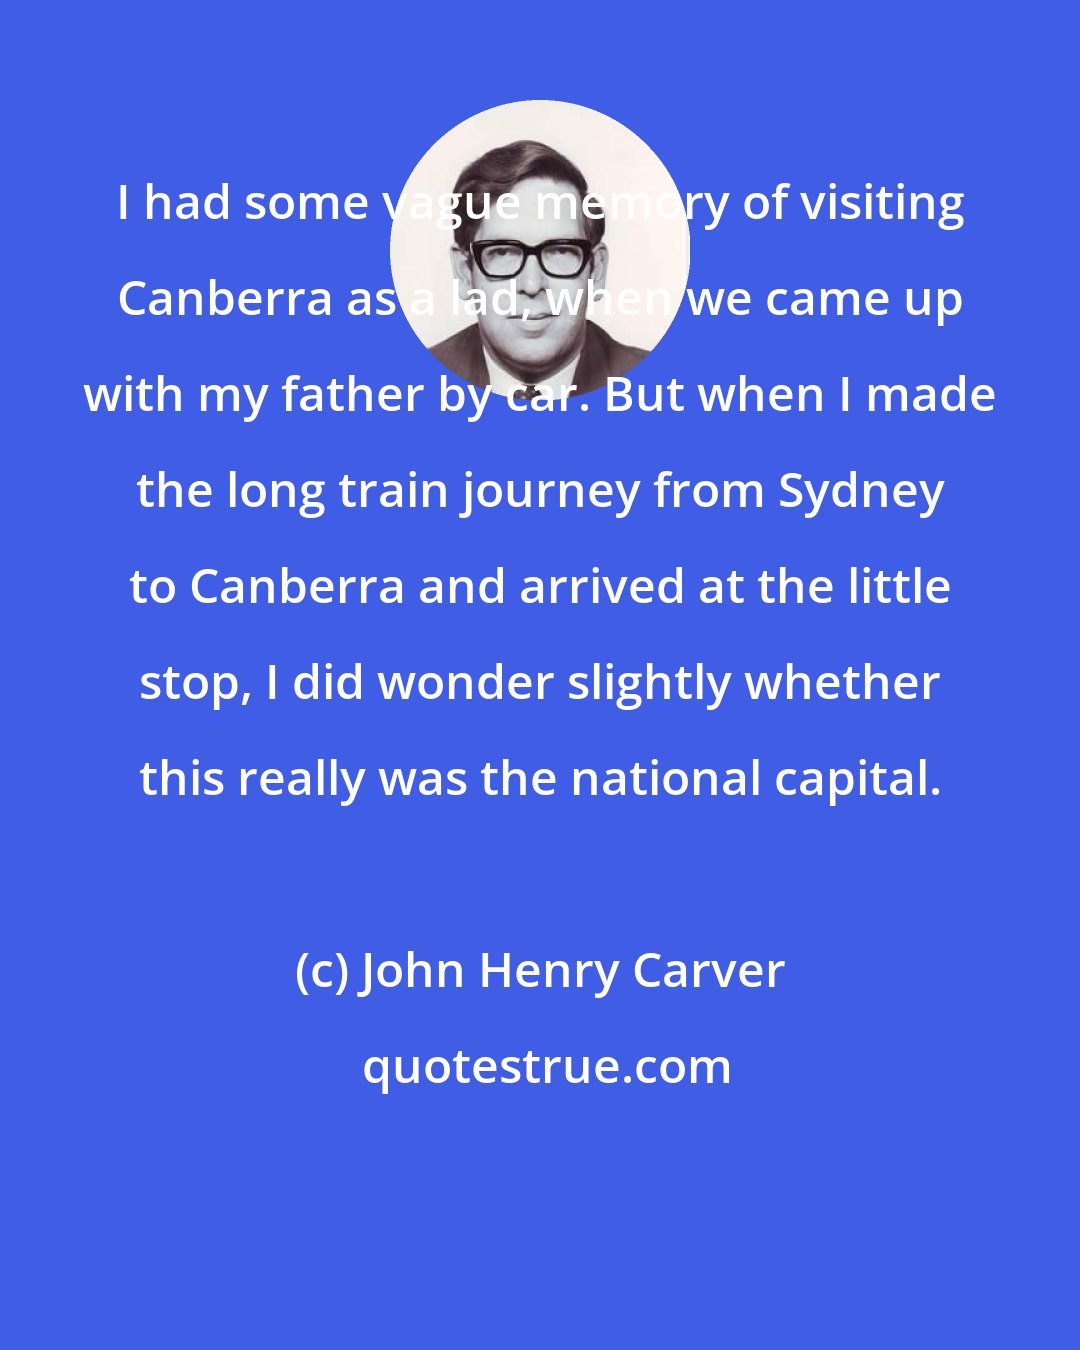 John Henry Carver: I had some vague memory of visiting Canberra as a lad, when we came up with my father by car. But when I made the long train journey from Sydney to Canberra and arrived at the little stop, I did wonder slightly whether this really was the national capital.